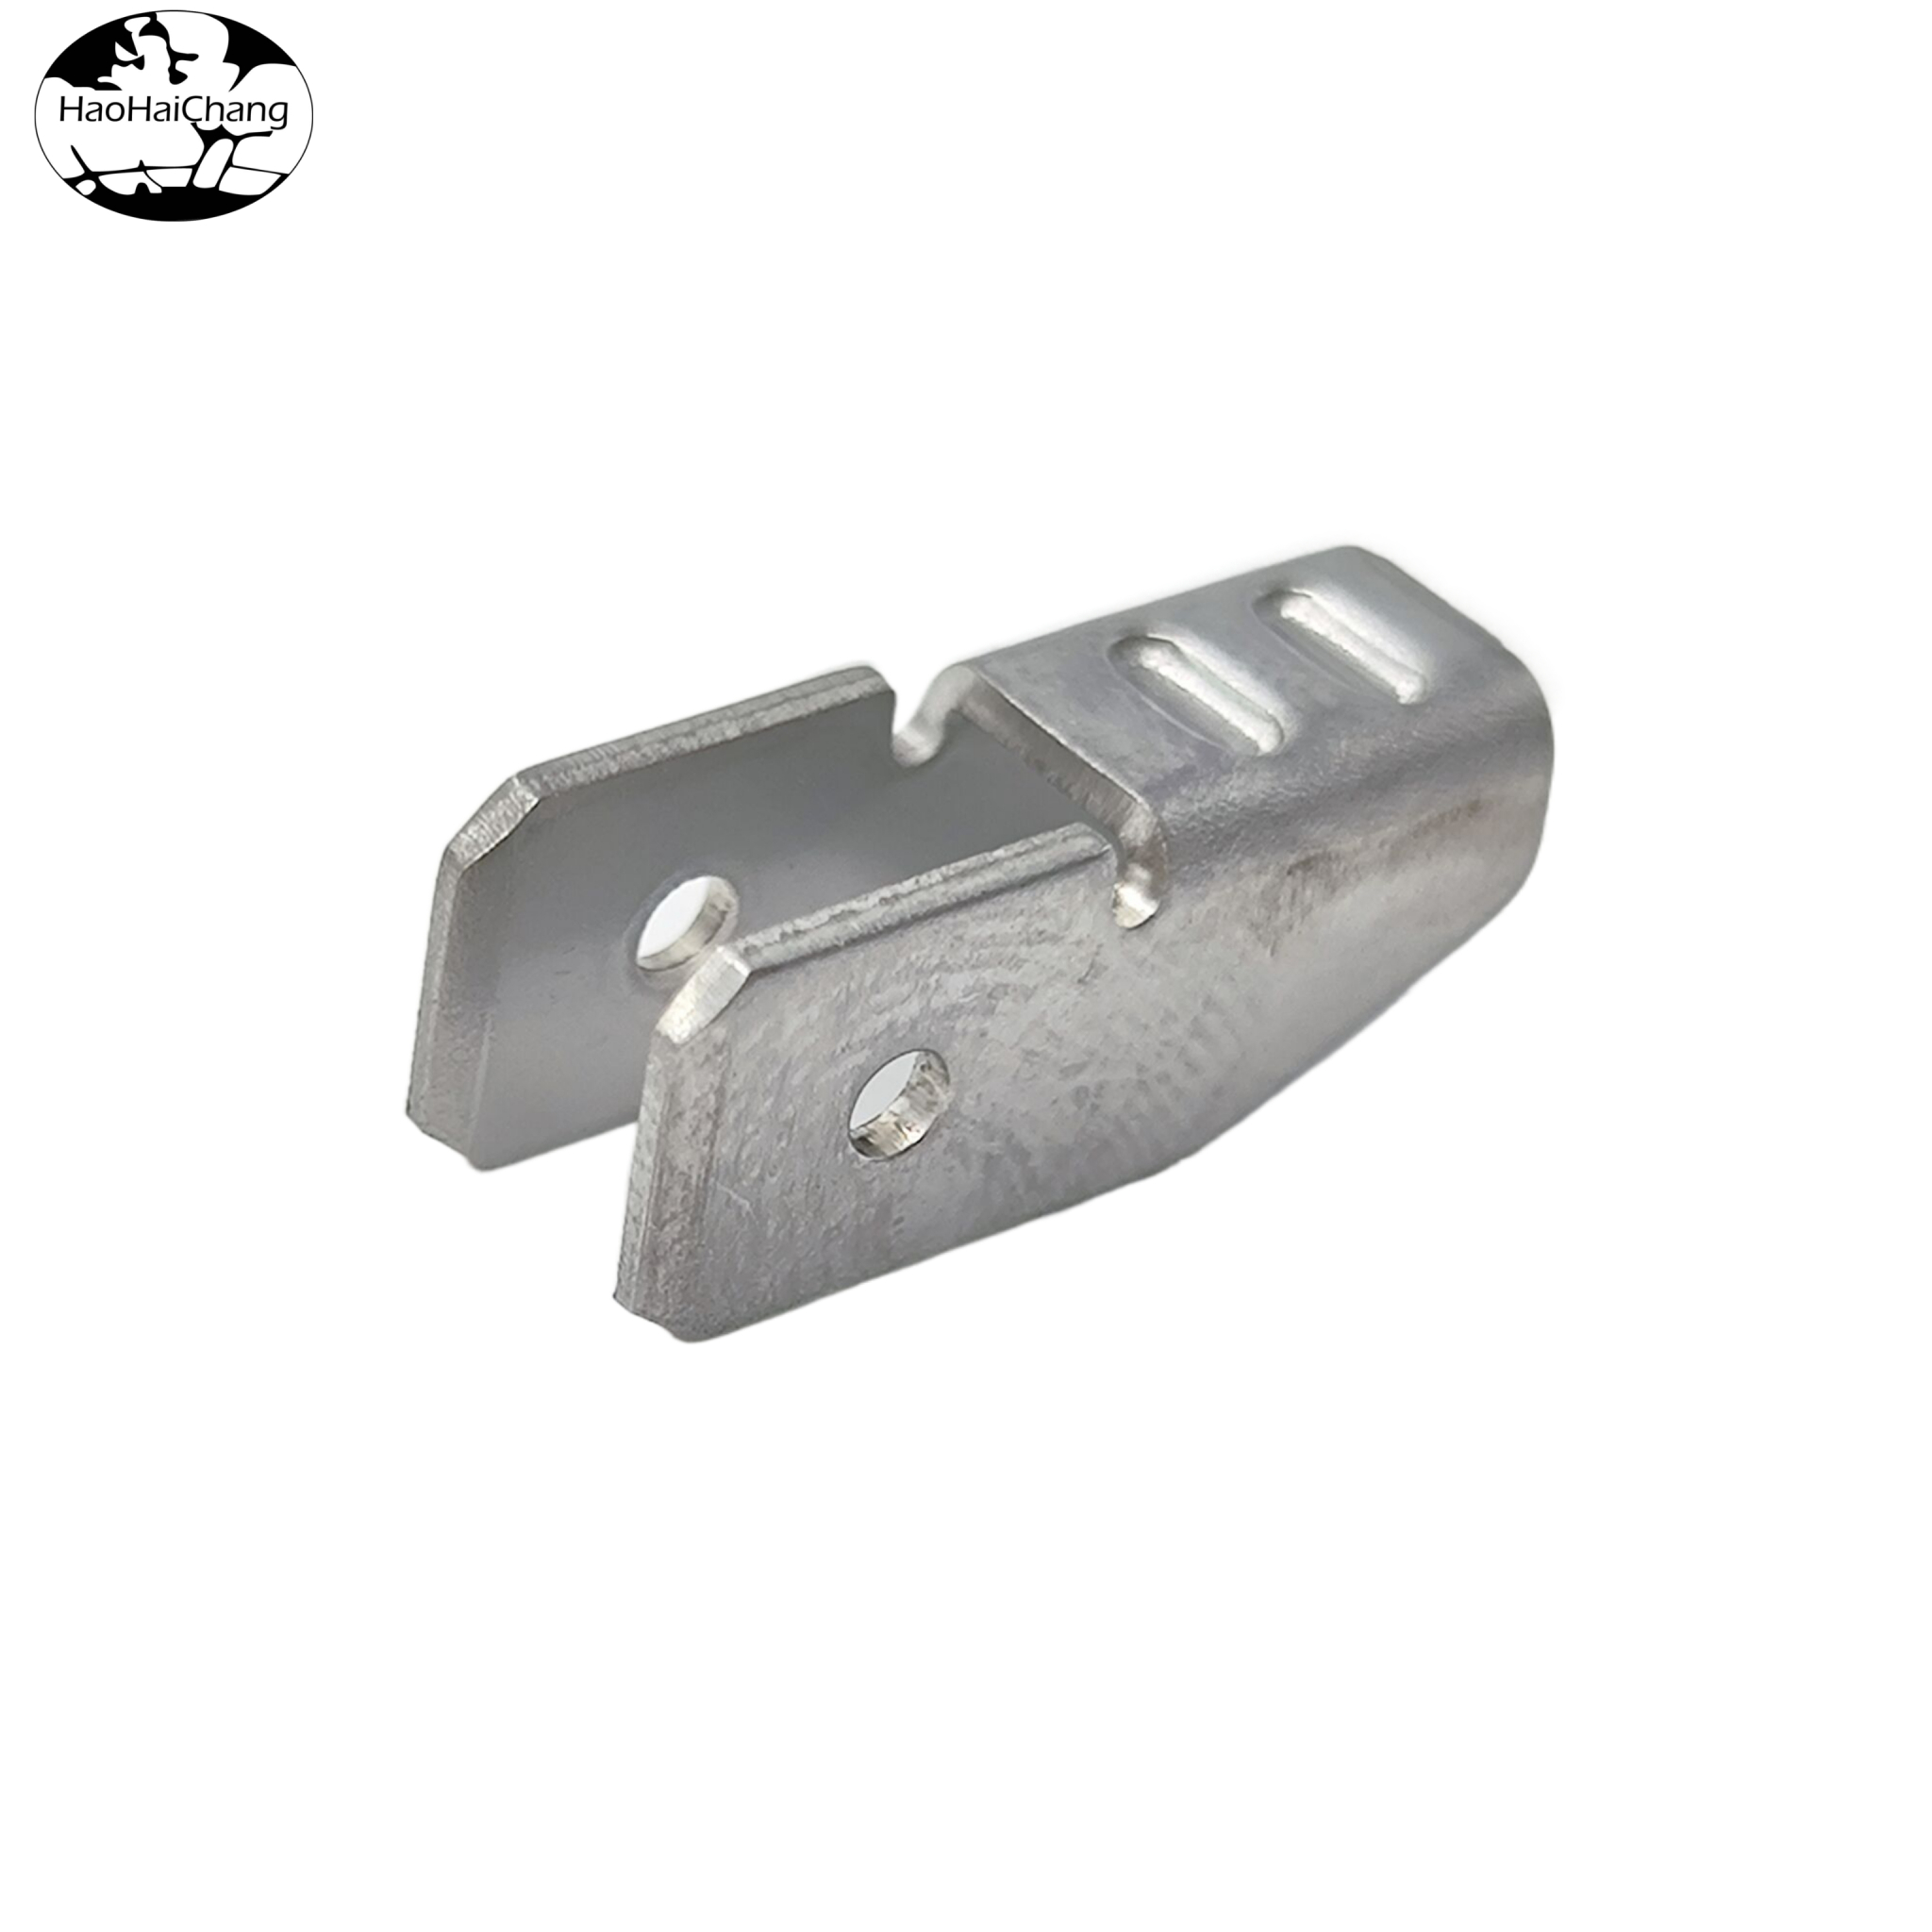 HHC-0308 Connector